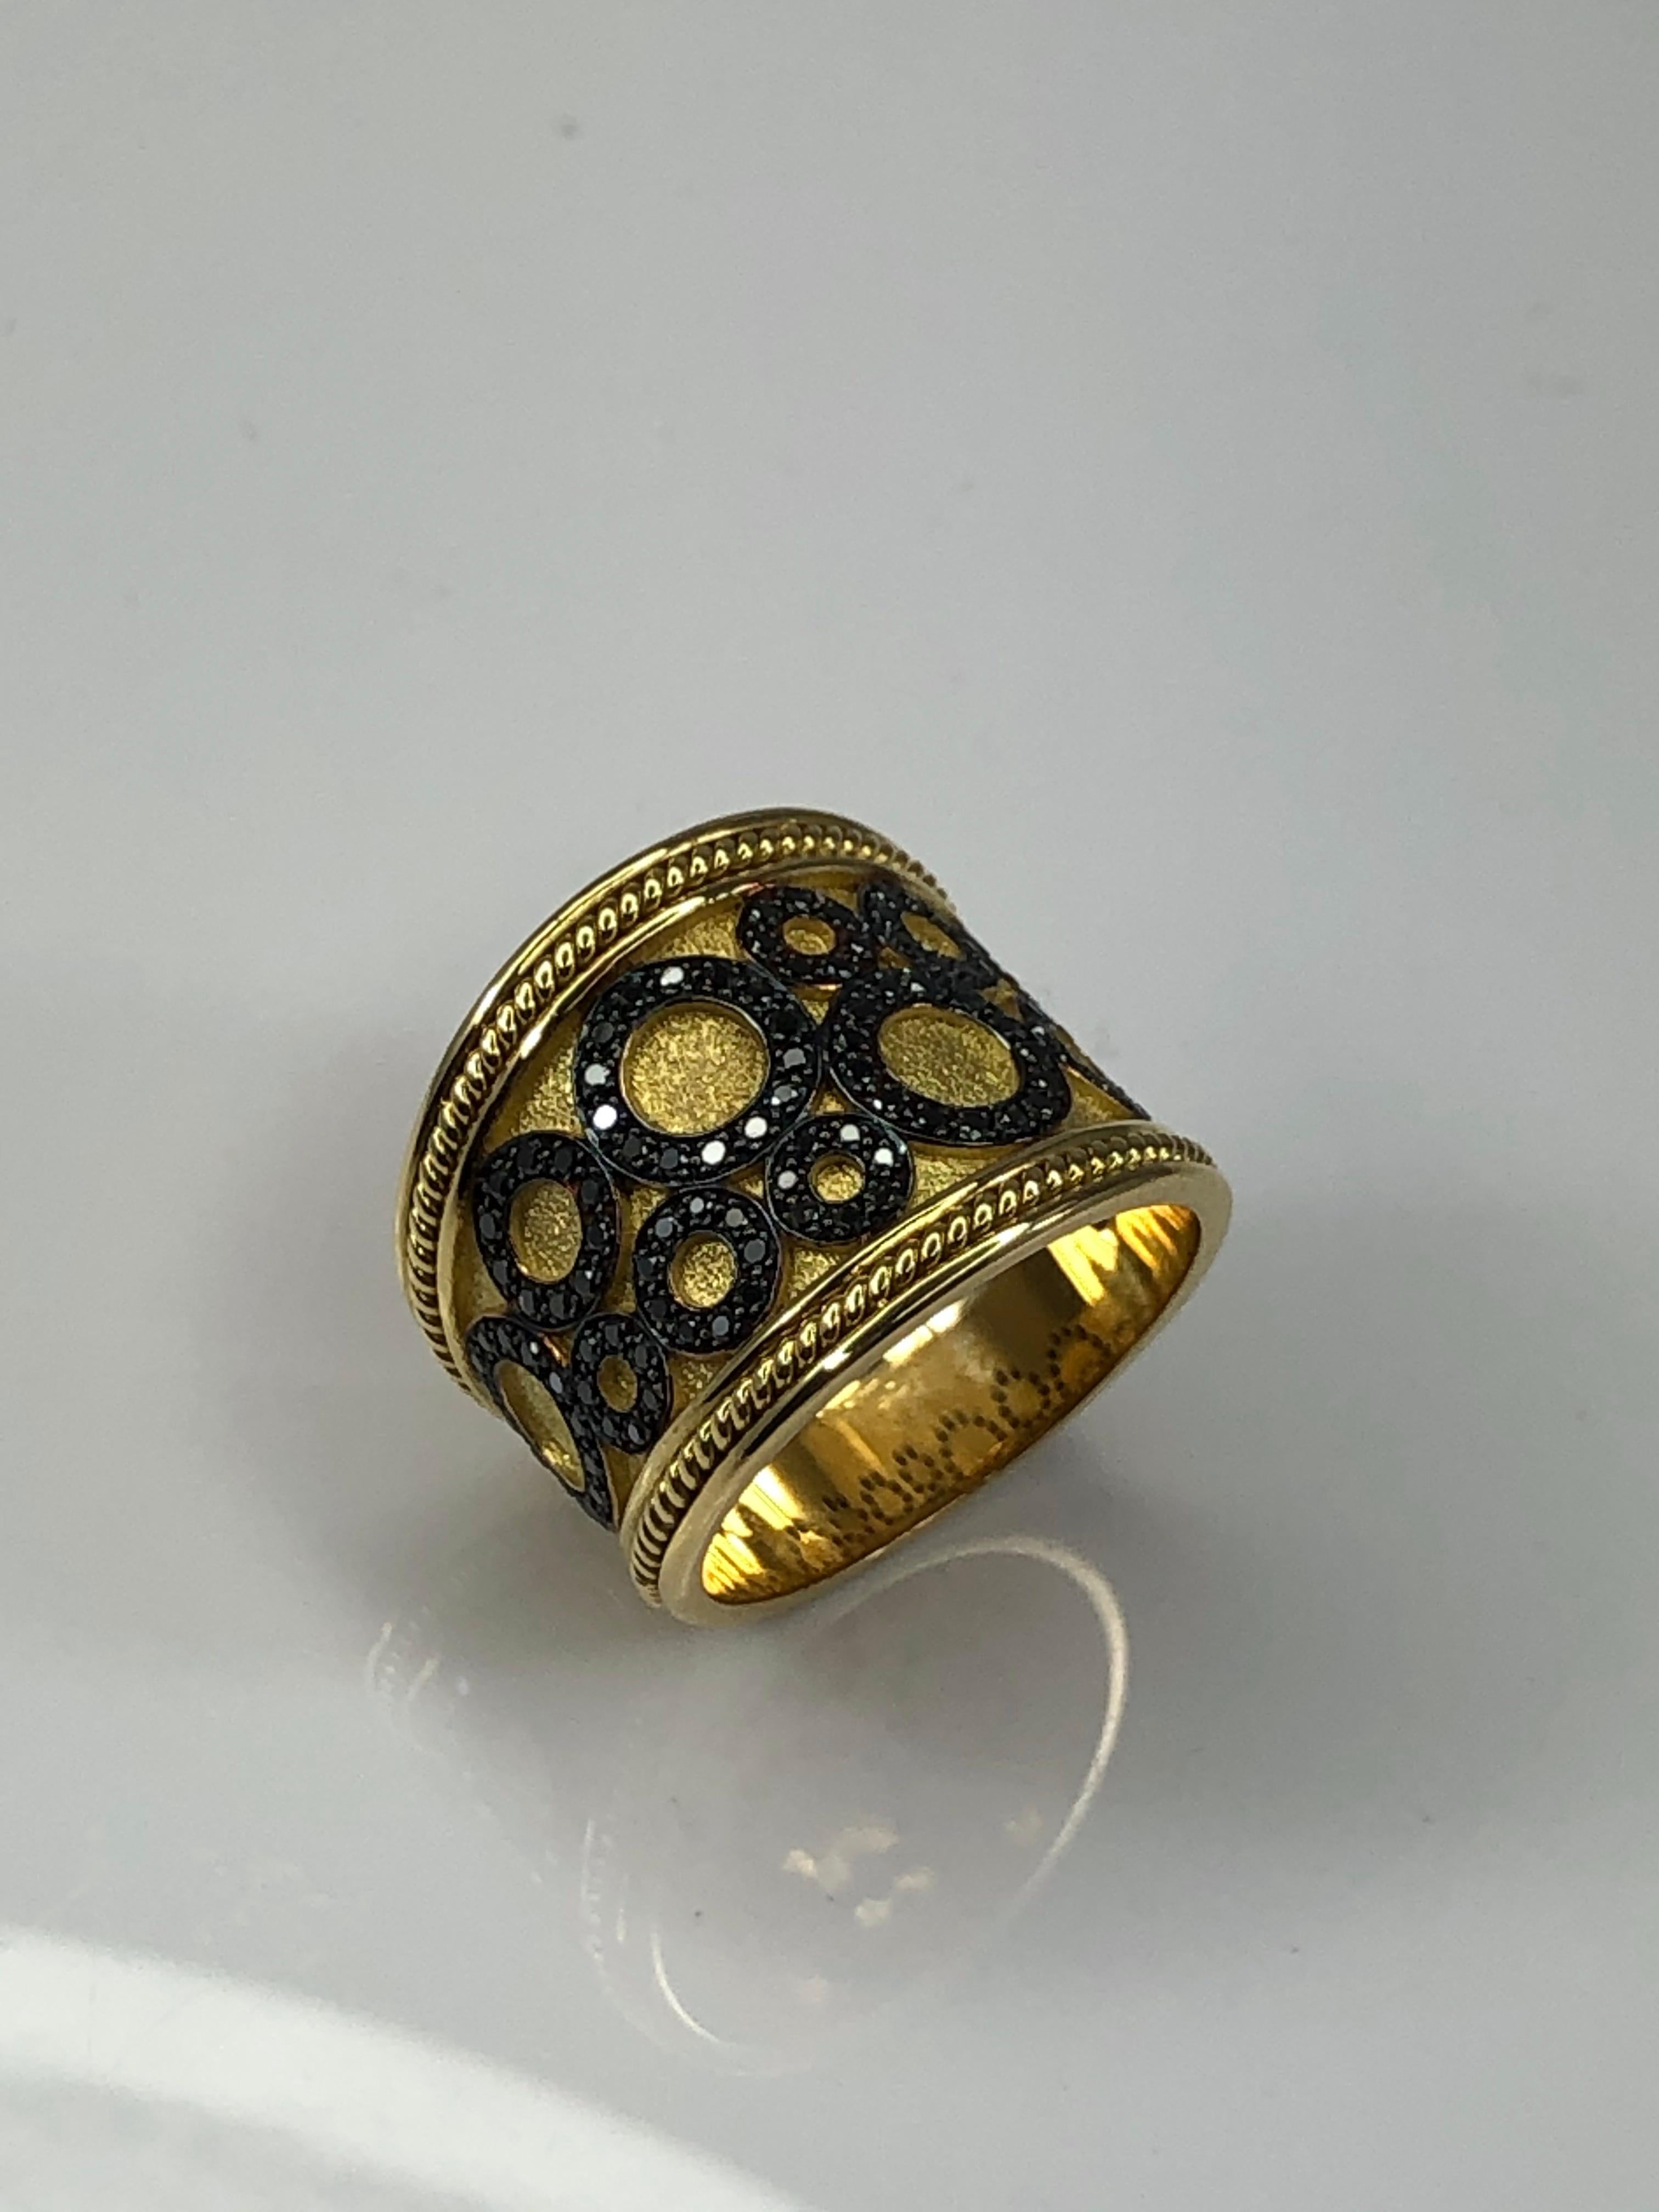 Presenting S.Georgios design ring handmade in 18 Karat Yellow Gold in Greece. This ring combines the ancient Byzantine technique with modern design. On velvet finish background stand out set of circles decorated with black diamonds in a total weight